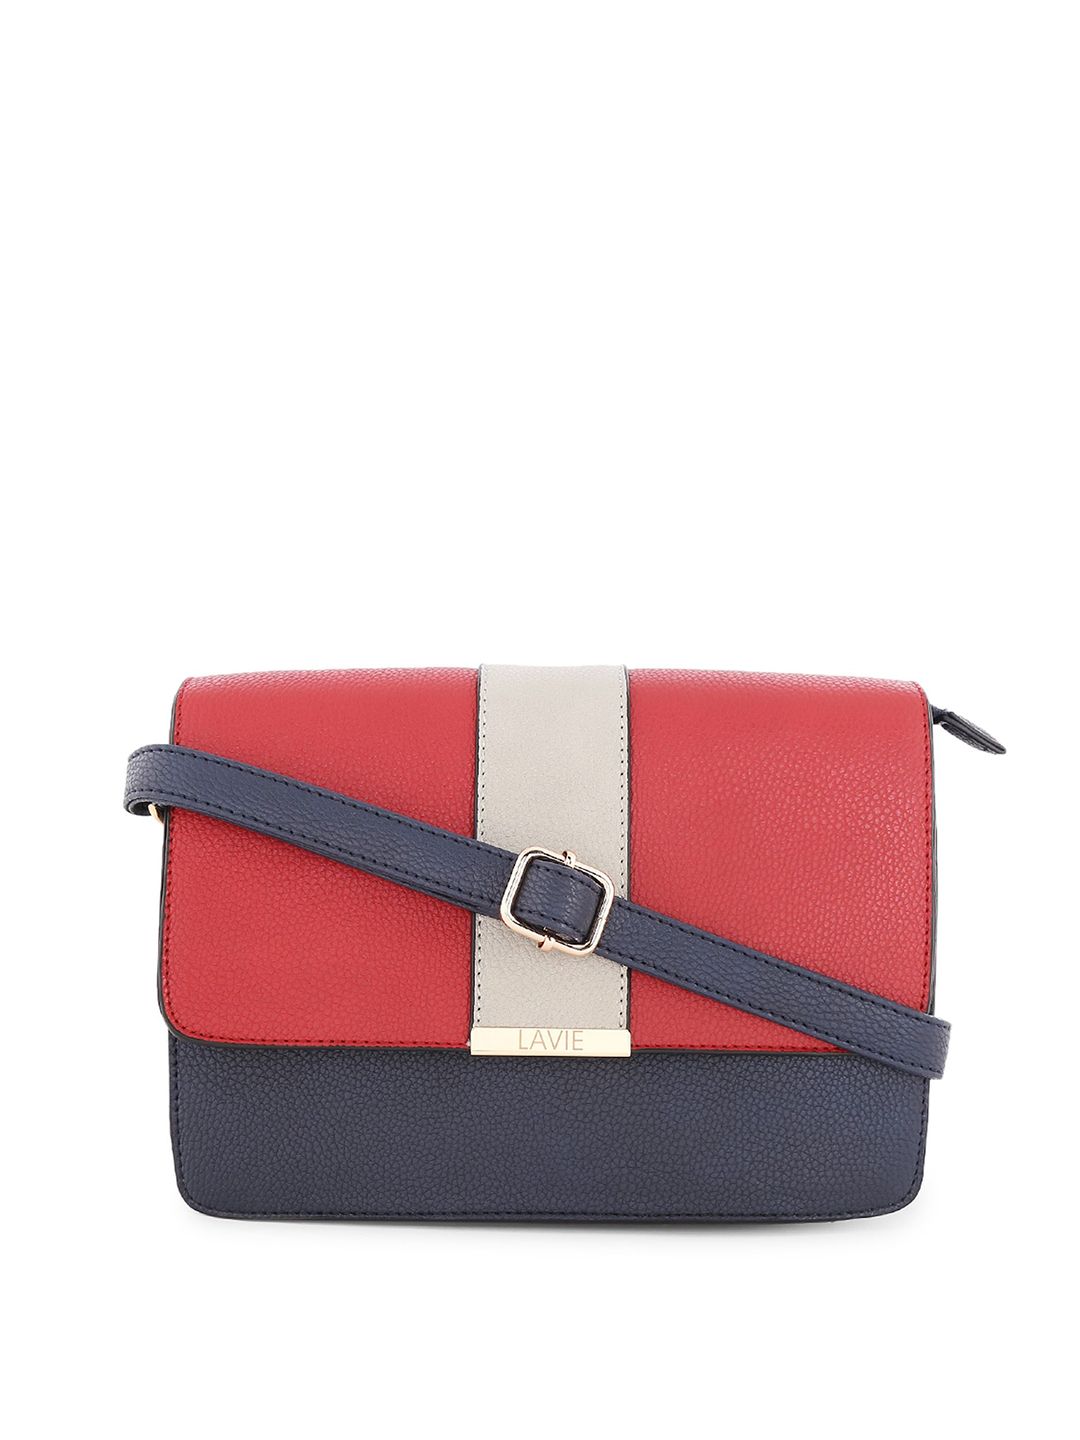 Lavie Navy Blue & Red Colourblocked Sling Bag Price in India